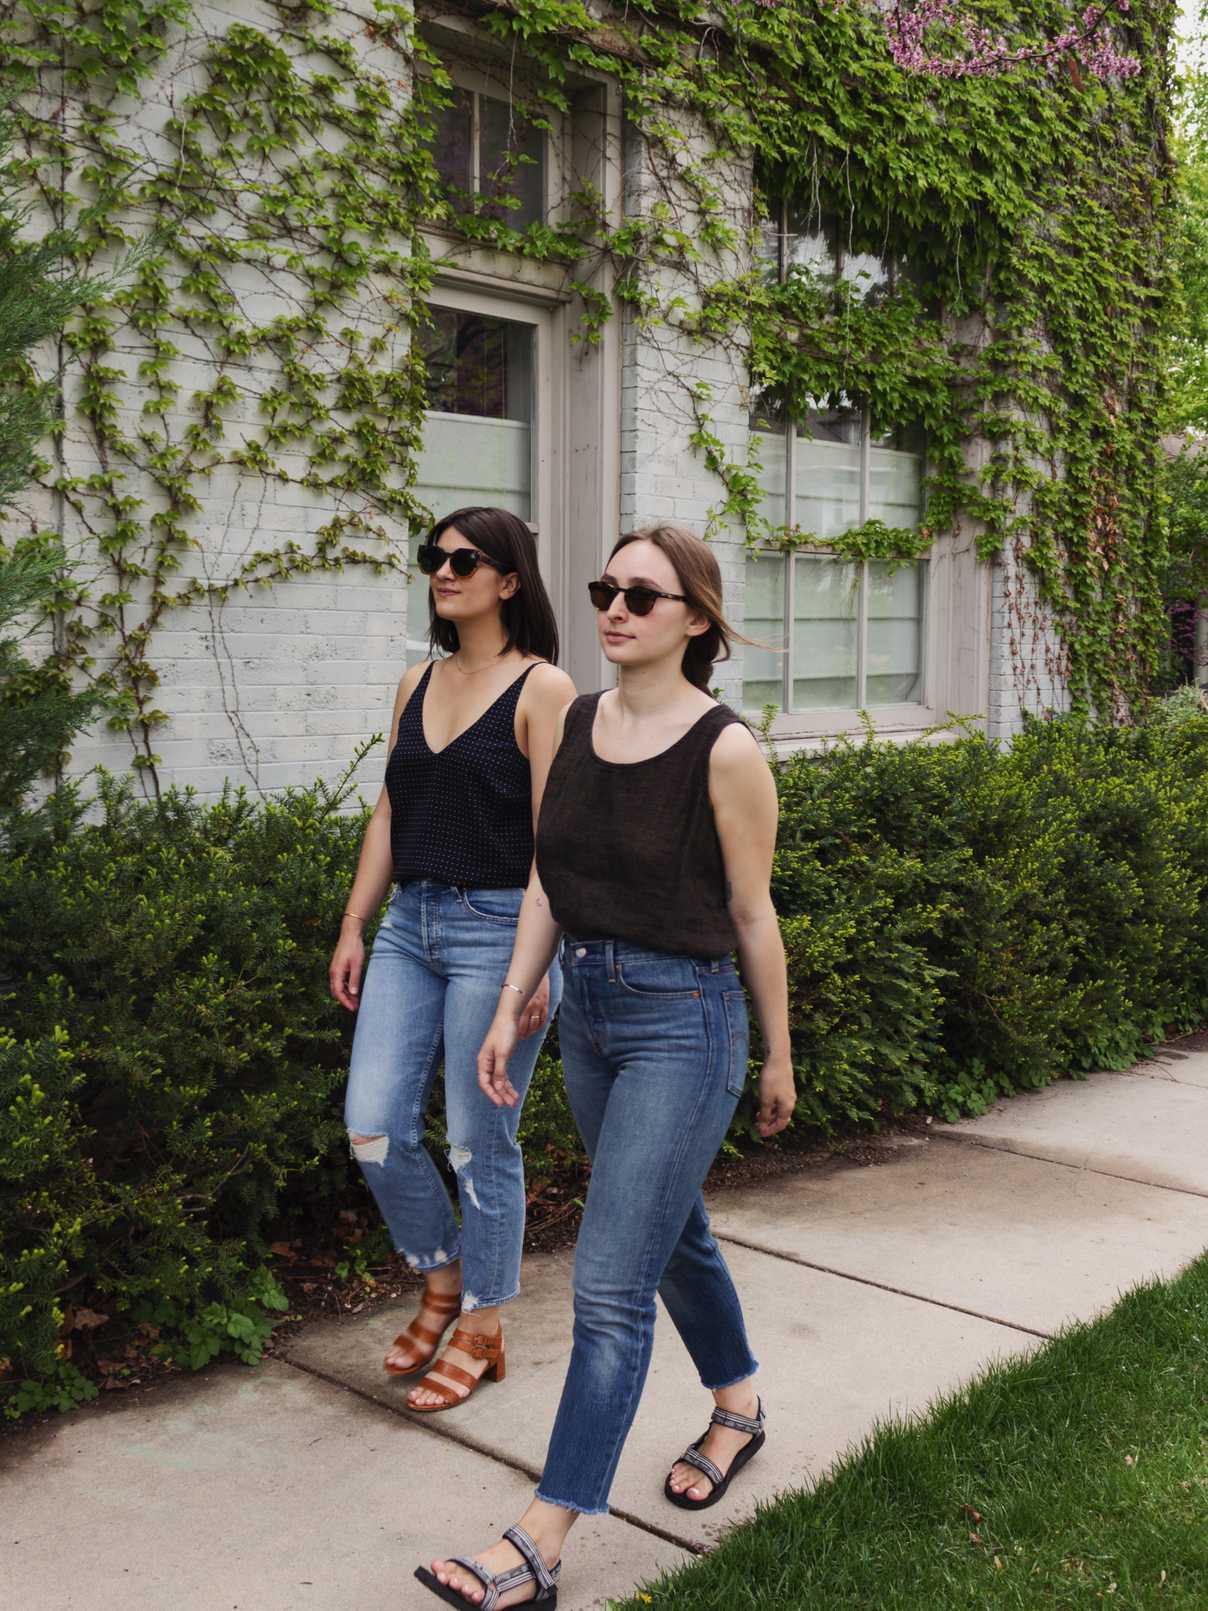 https://otherpieces.com/static/1f64fc90e7182f6cf156c2f939b69349/12649/sara-and-jacqs-walking-in-jeans-tanks-and-sandals-outfit.jpg